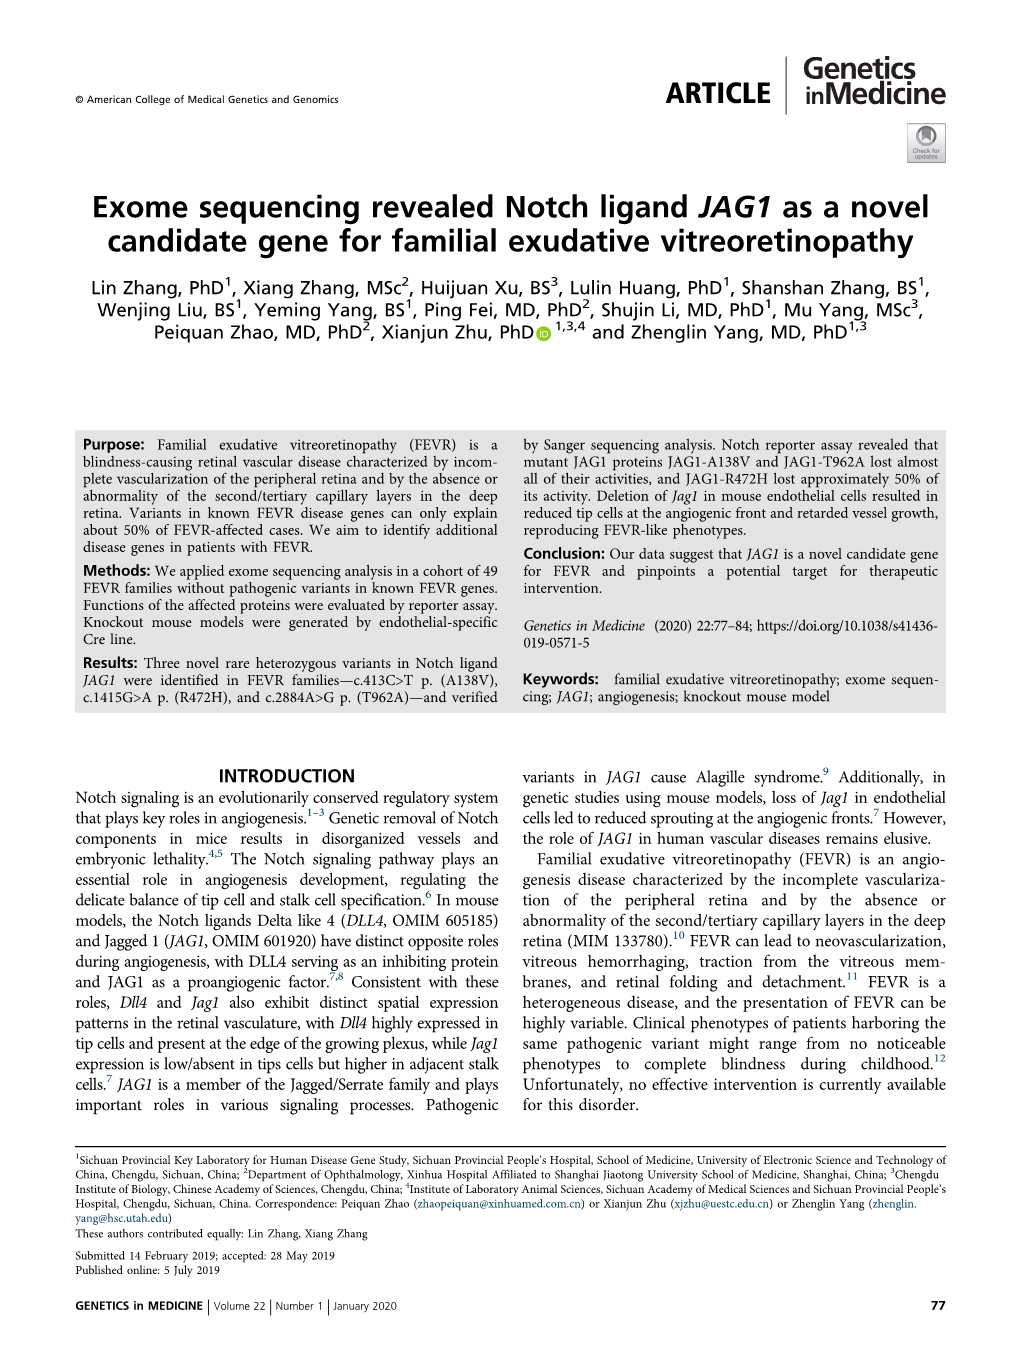 Exome Sequencing Revealed Notch Ligand JAG1 As a Novel Candidate Gene for Familial Exudative Vitreoretinopathy